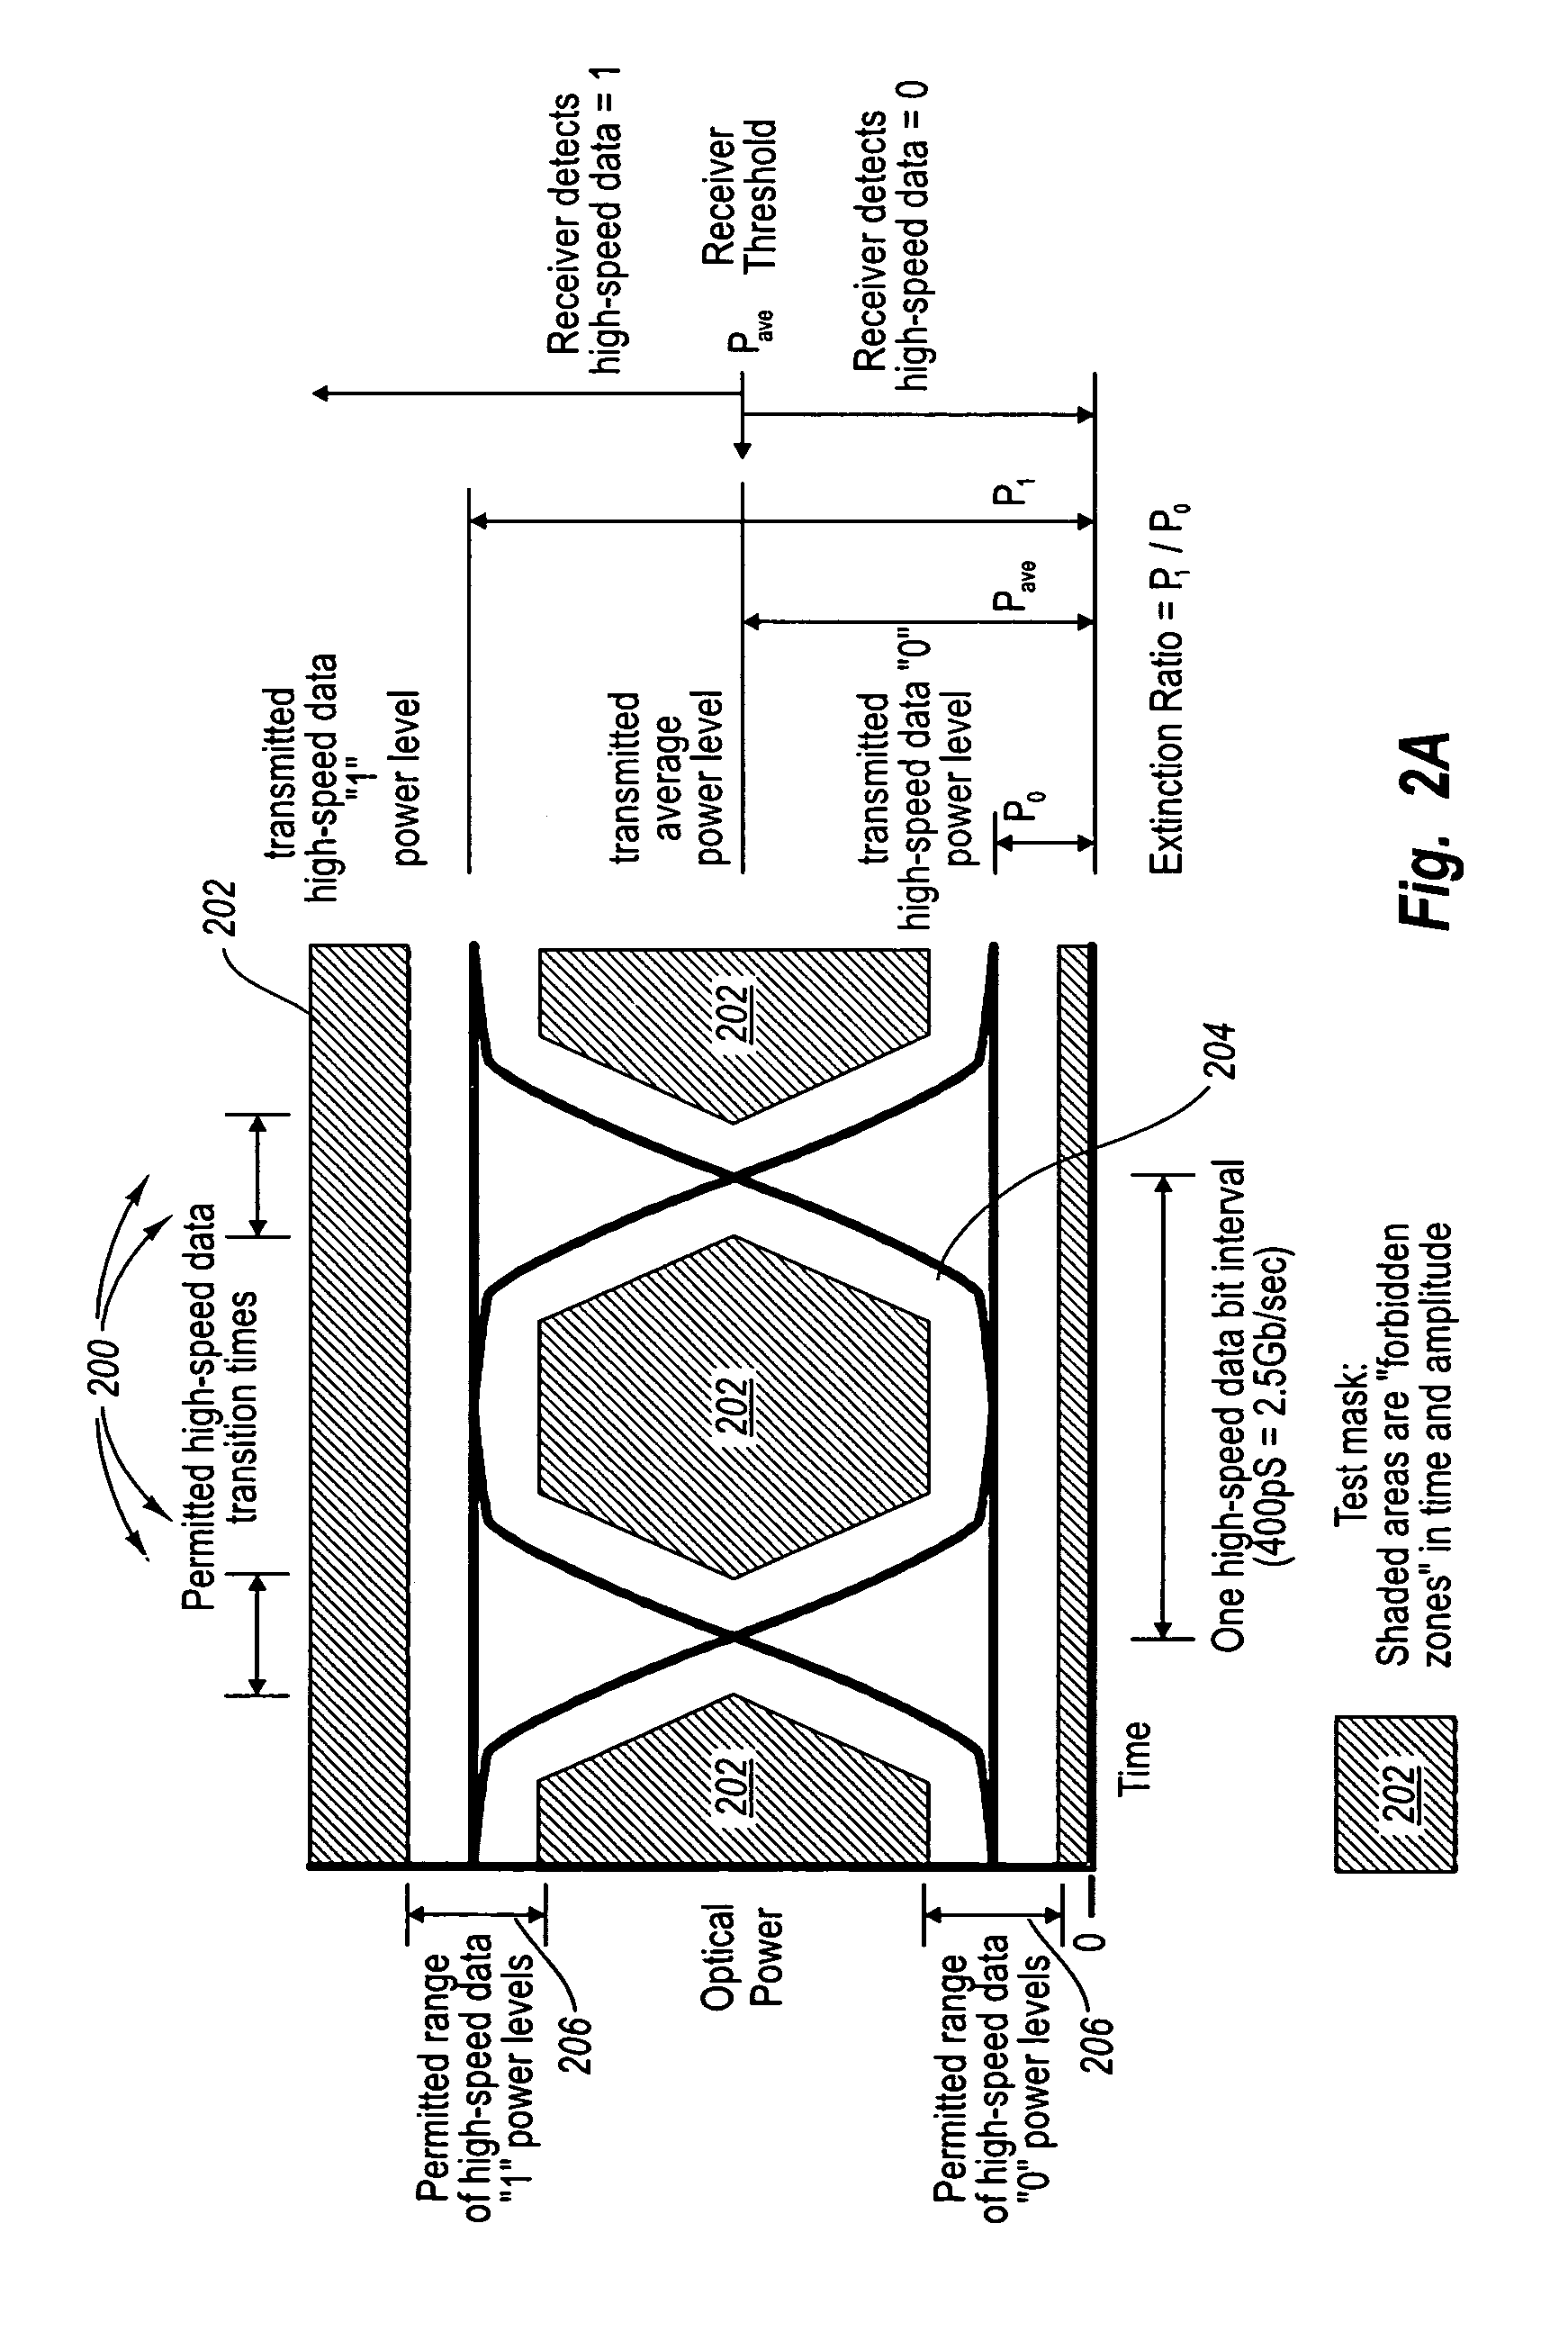 Network data transmission and diagnostic methods using out-of-band data